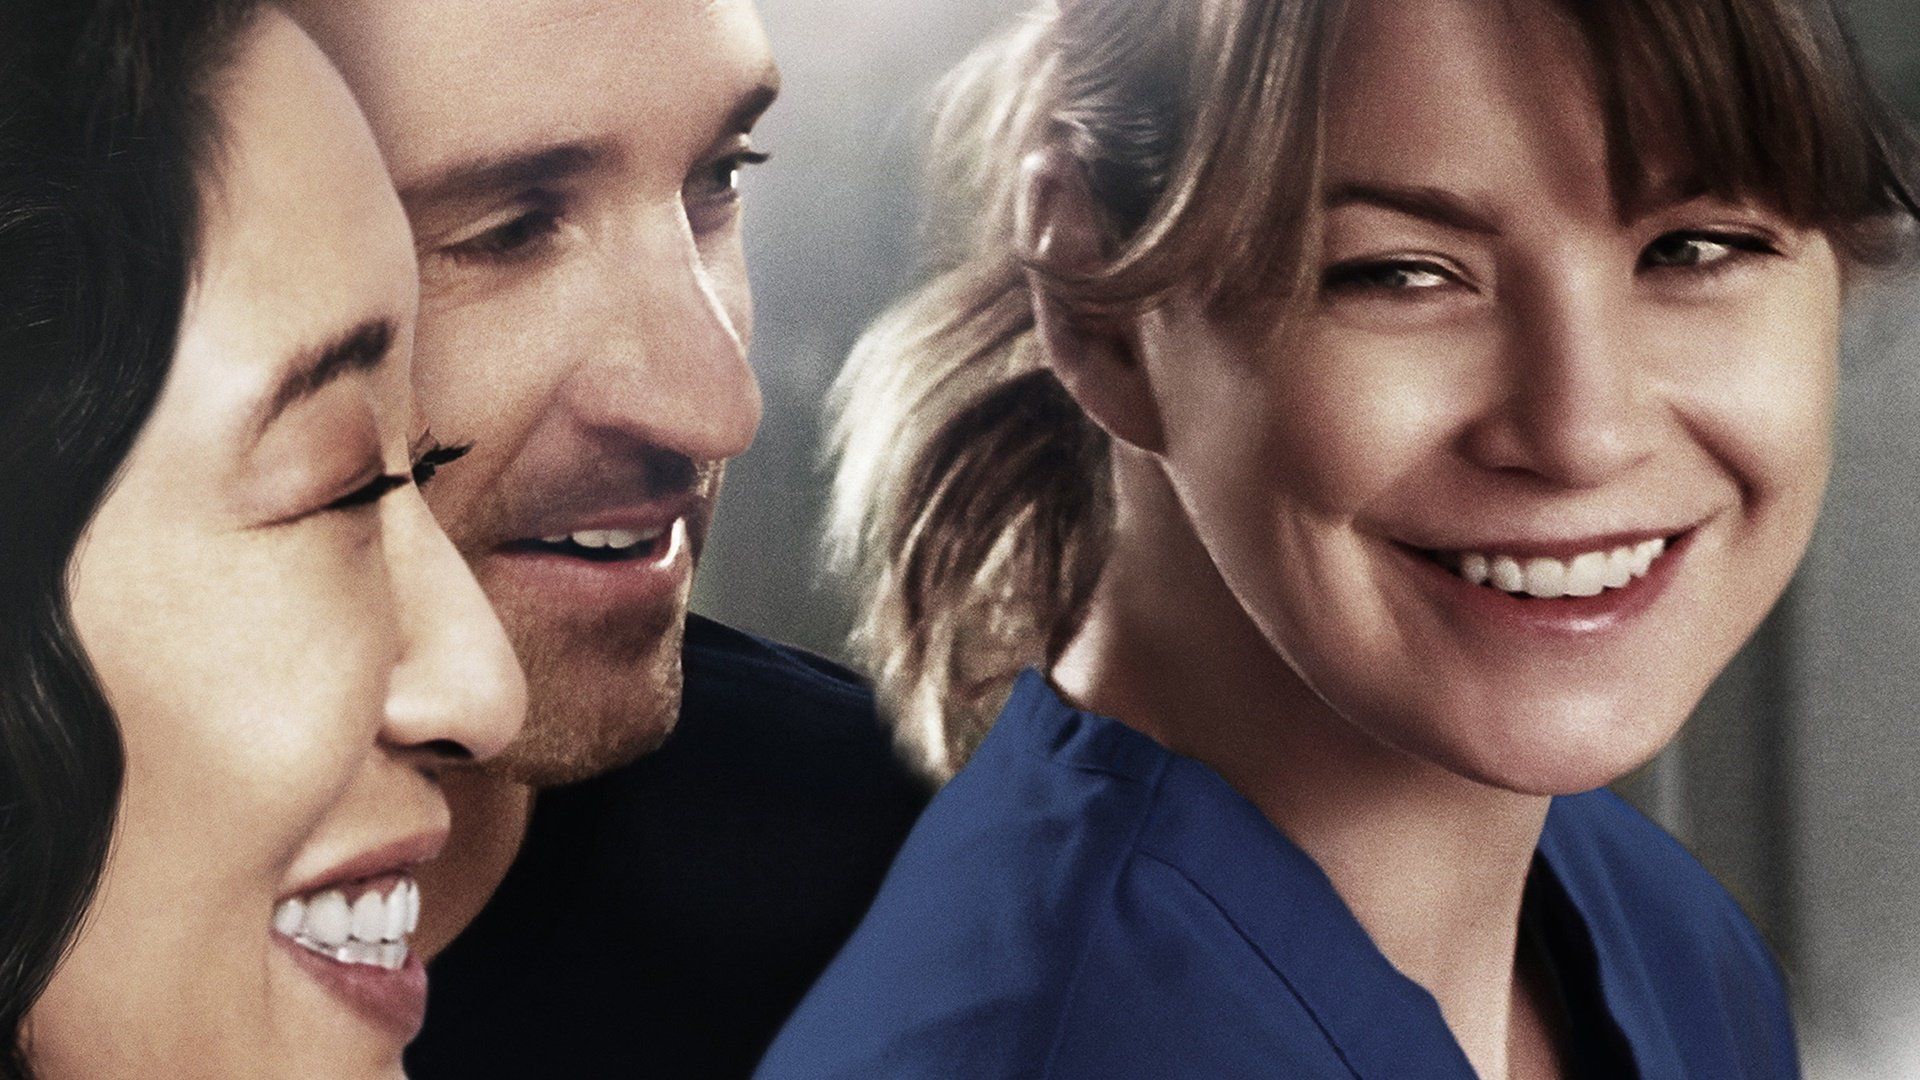 A close up of the faces of McDreamy, Alex and Meredith on a grey's anatomy poster - Grey's Anatomy